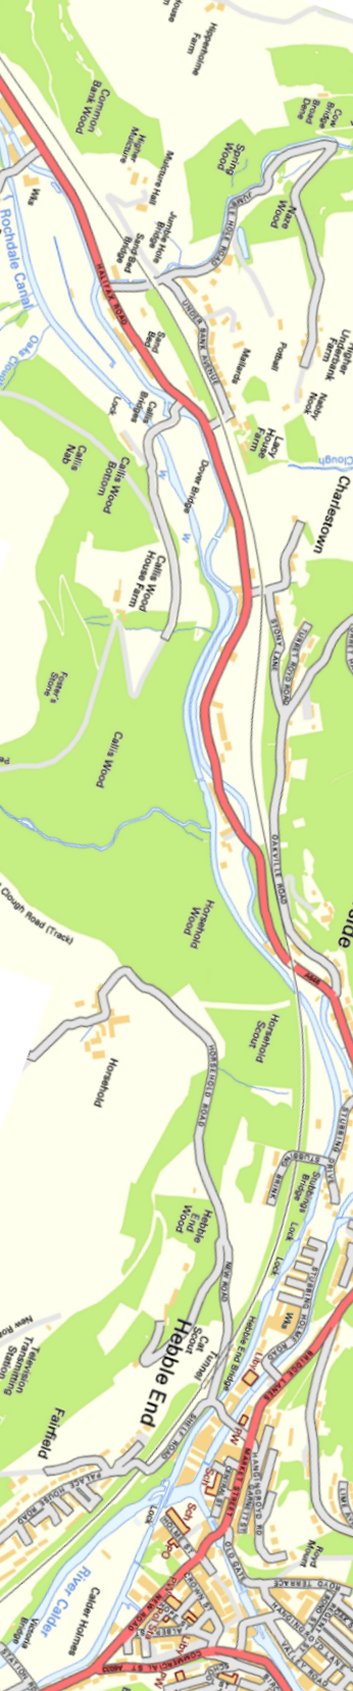 Section from Ordnance Survey OpenSource mapping 2013 showing L&YR railway line from Eastwood to Hebble End